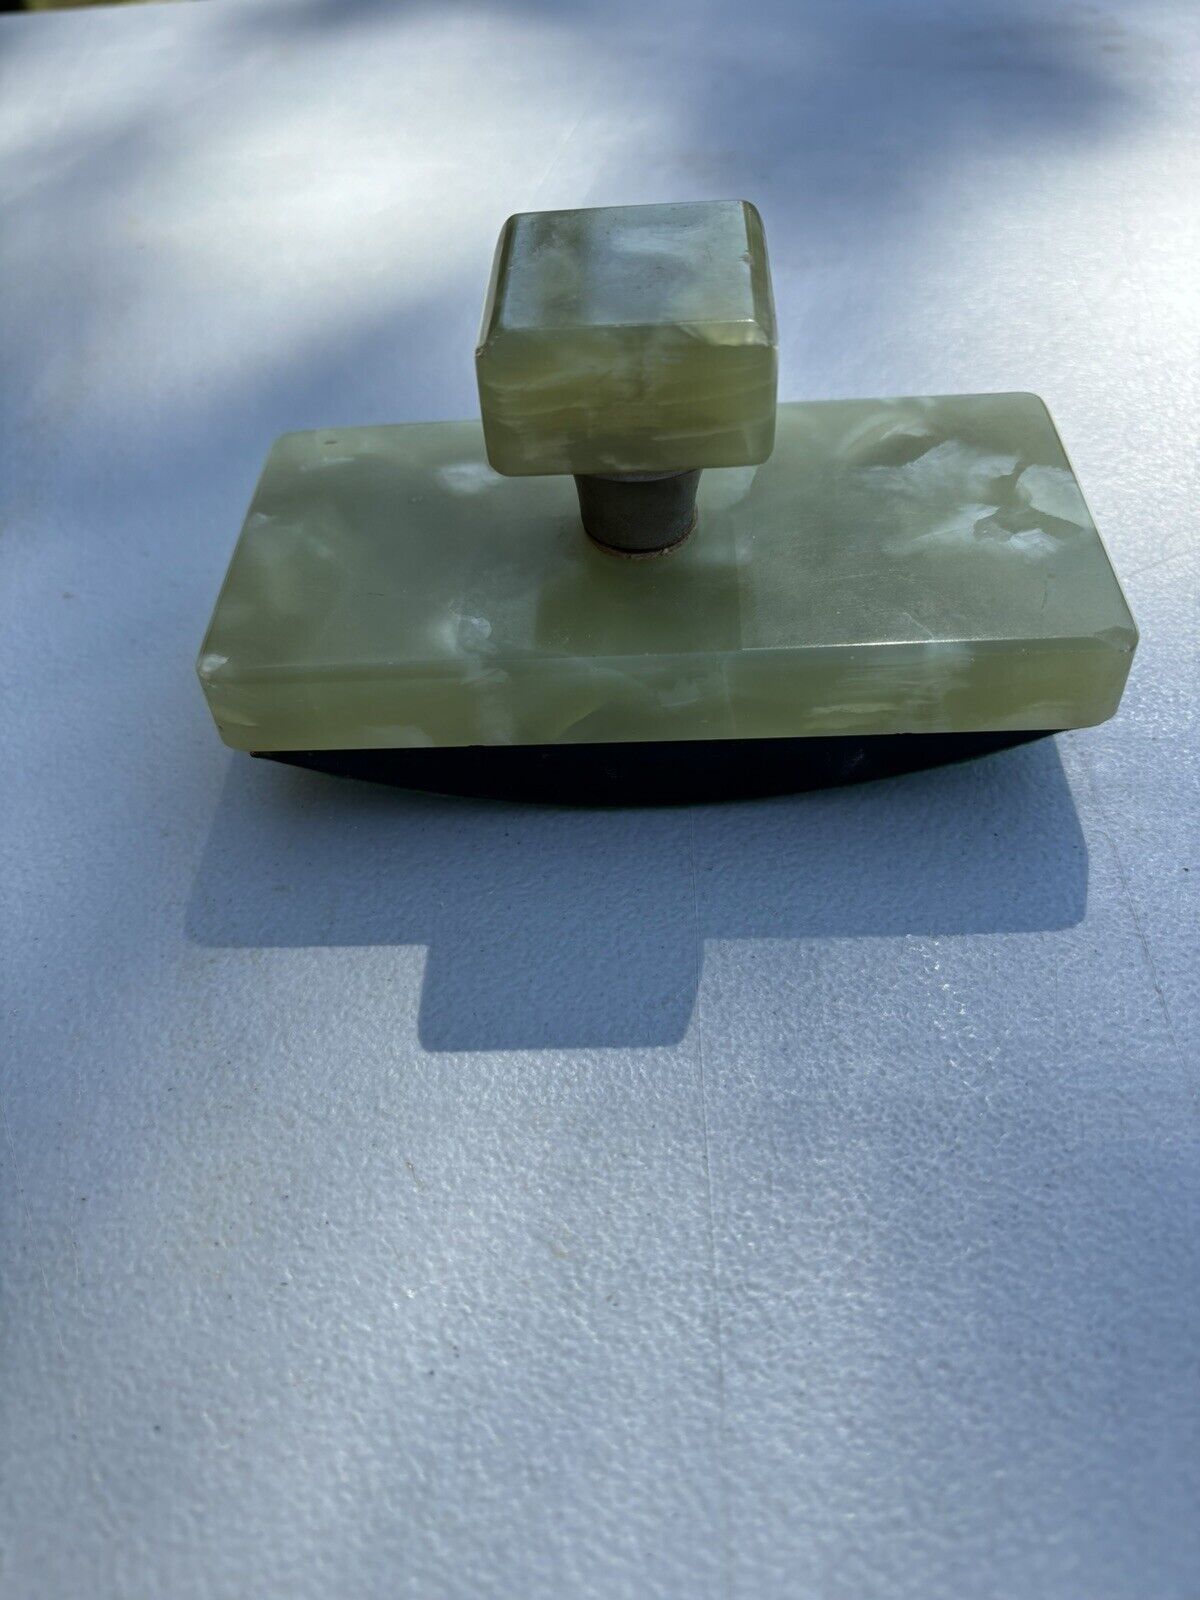 Vintage Green Marble Writing Ink Blotter - Desk Accessory - Collectible